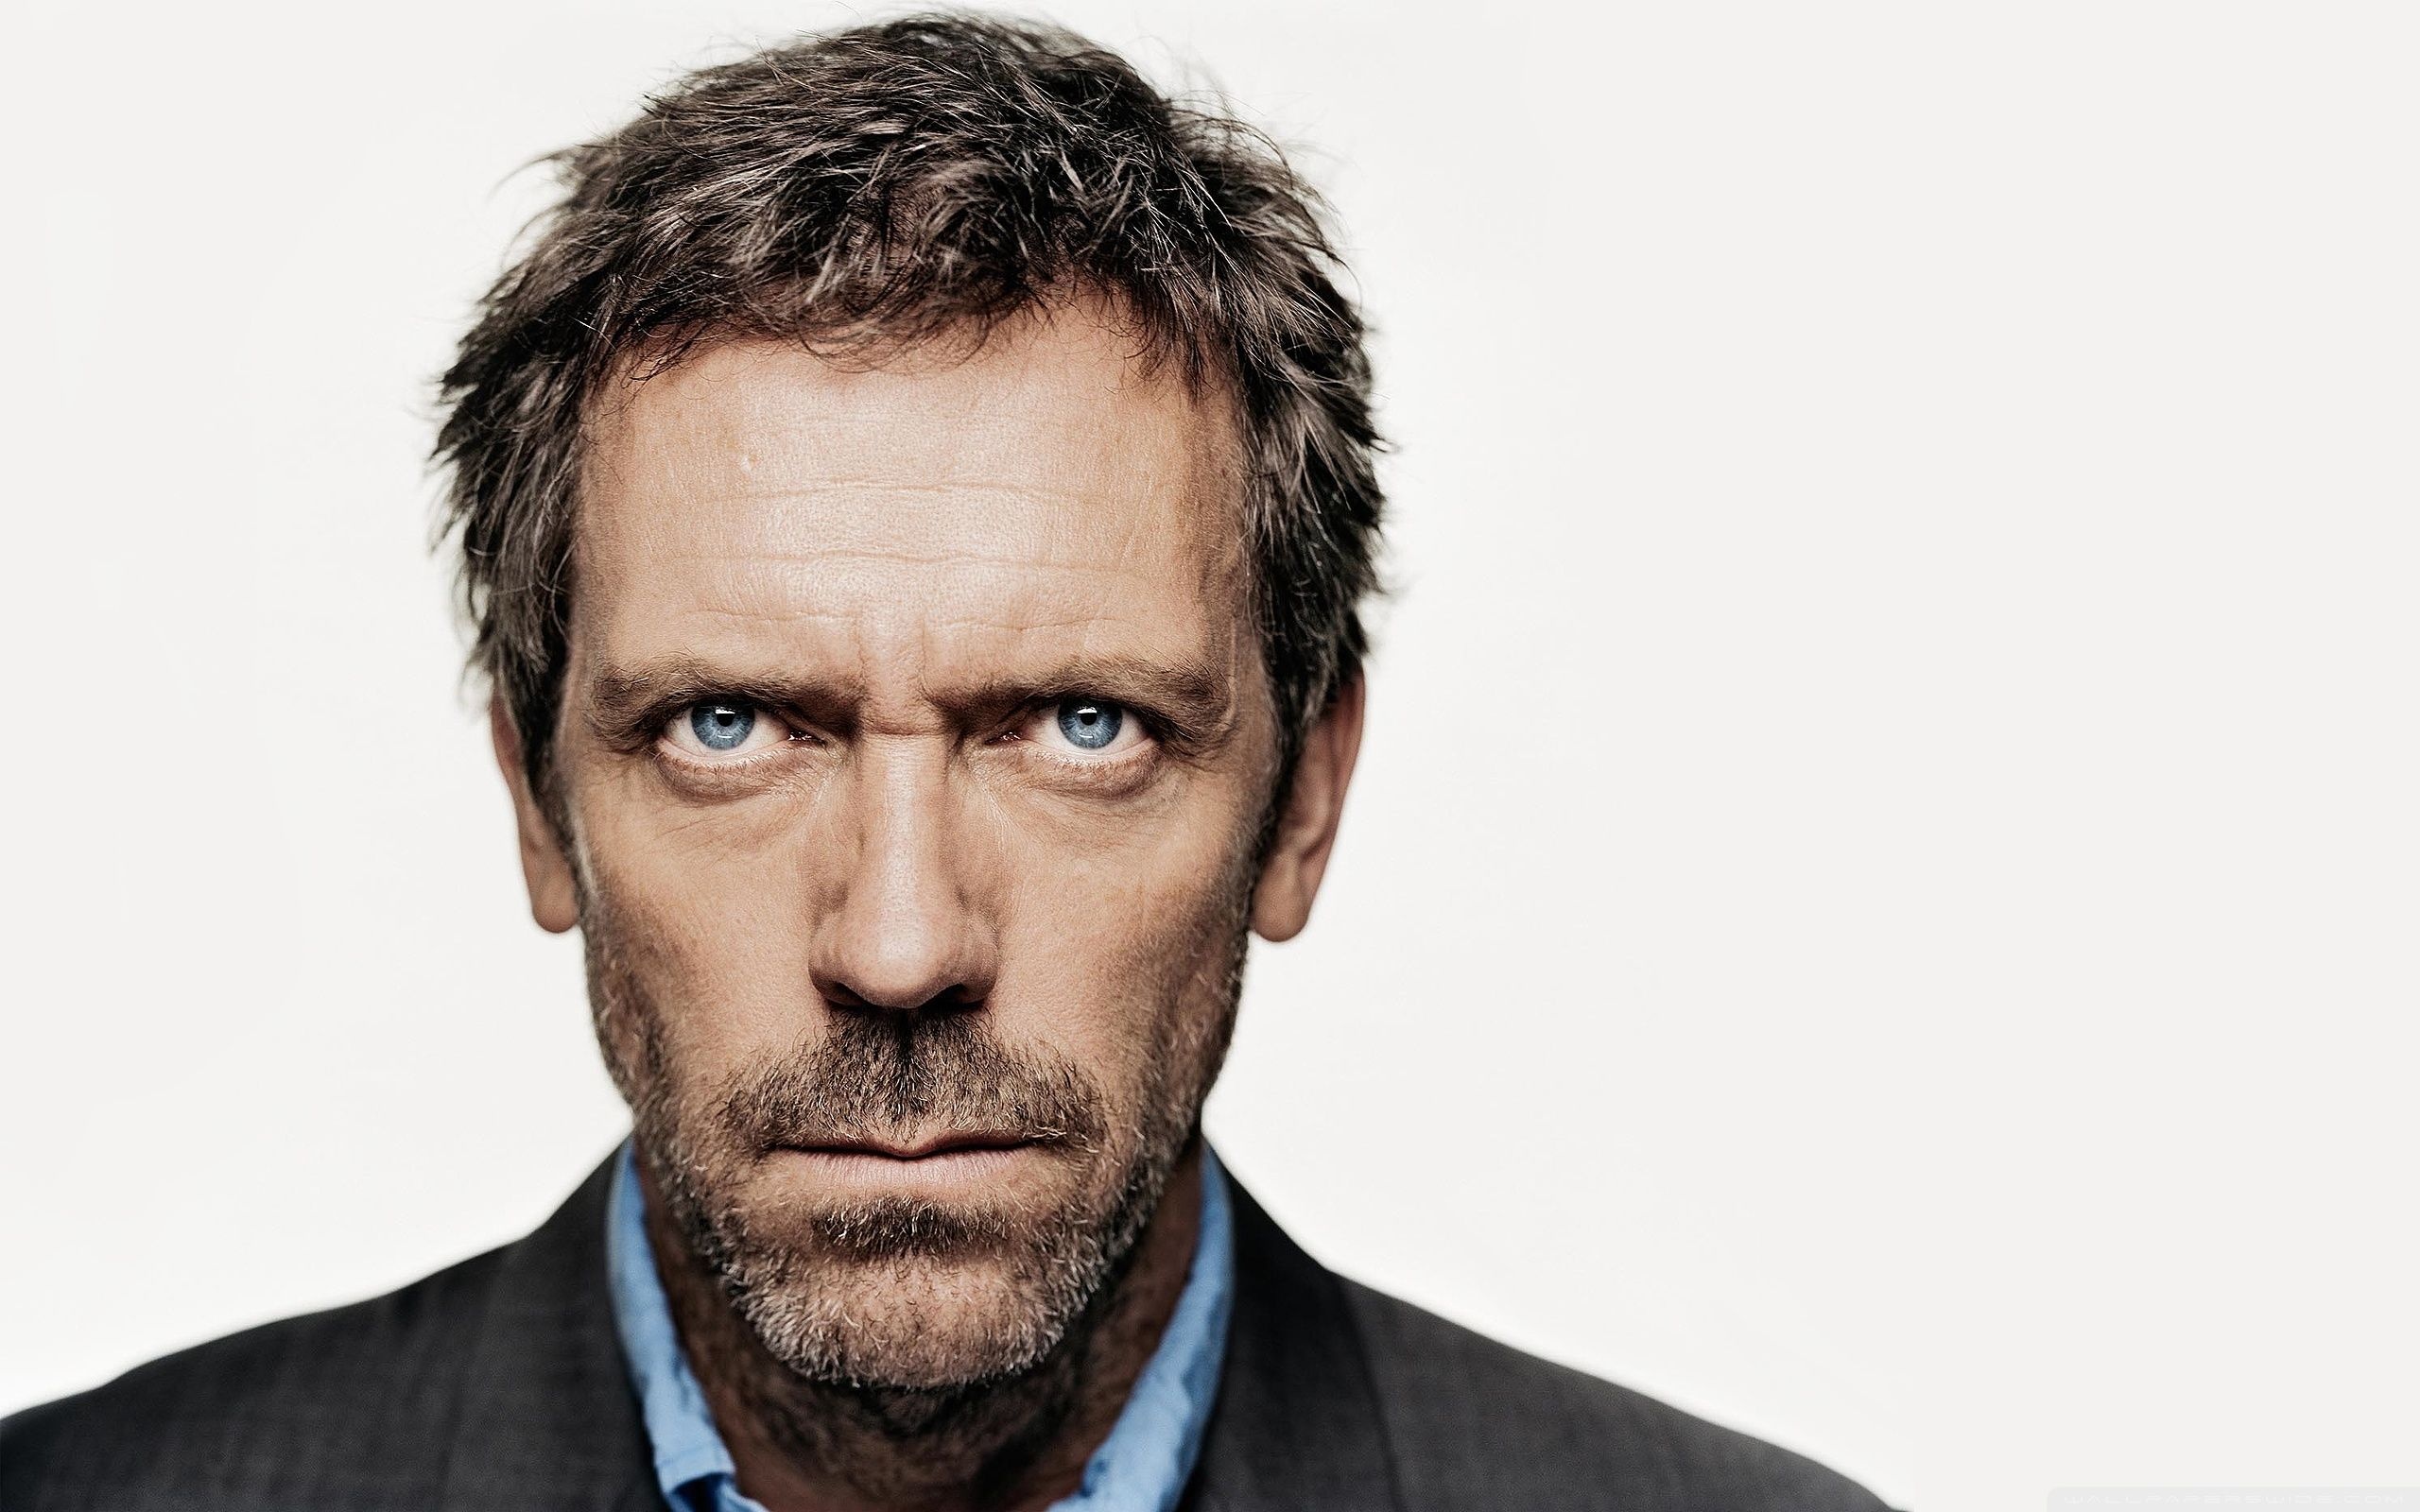 Dr. House: The series' main character, An unconventional, misanthropic medical genius. 2560x1600 HD Background.